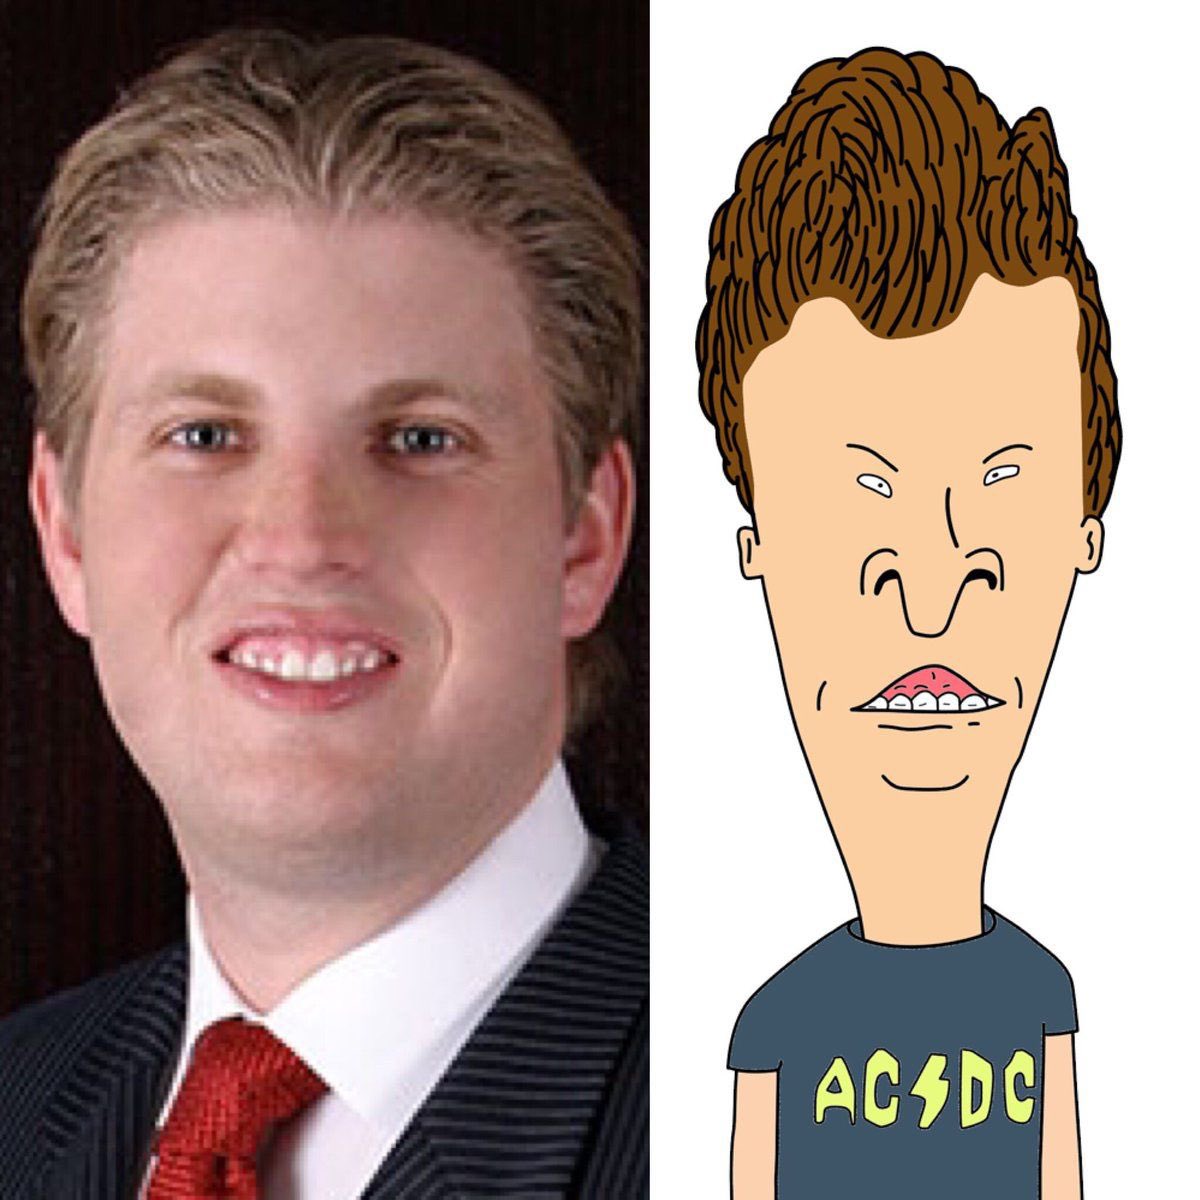 I see Eric trump is out there defending his title as The Dumbest Trump once again. 🙄 So pathetic and sad. Daddy’s never gonna love you, Gums.